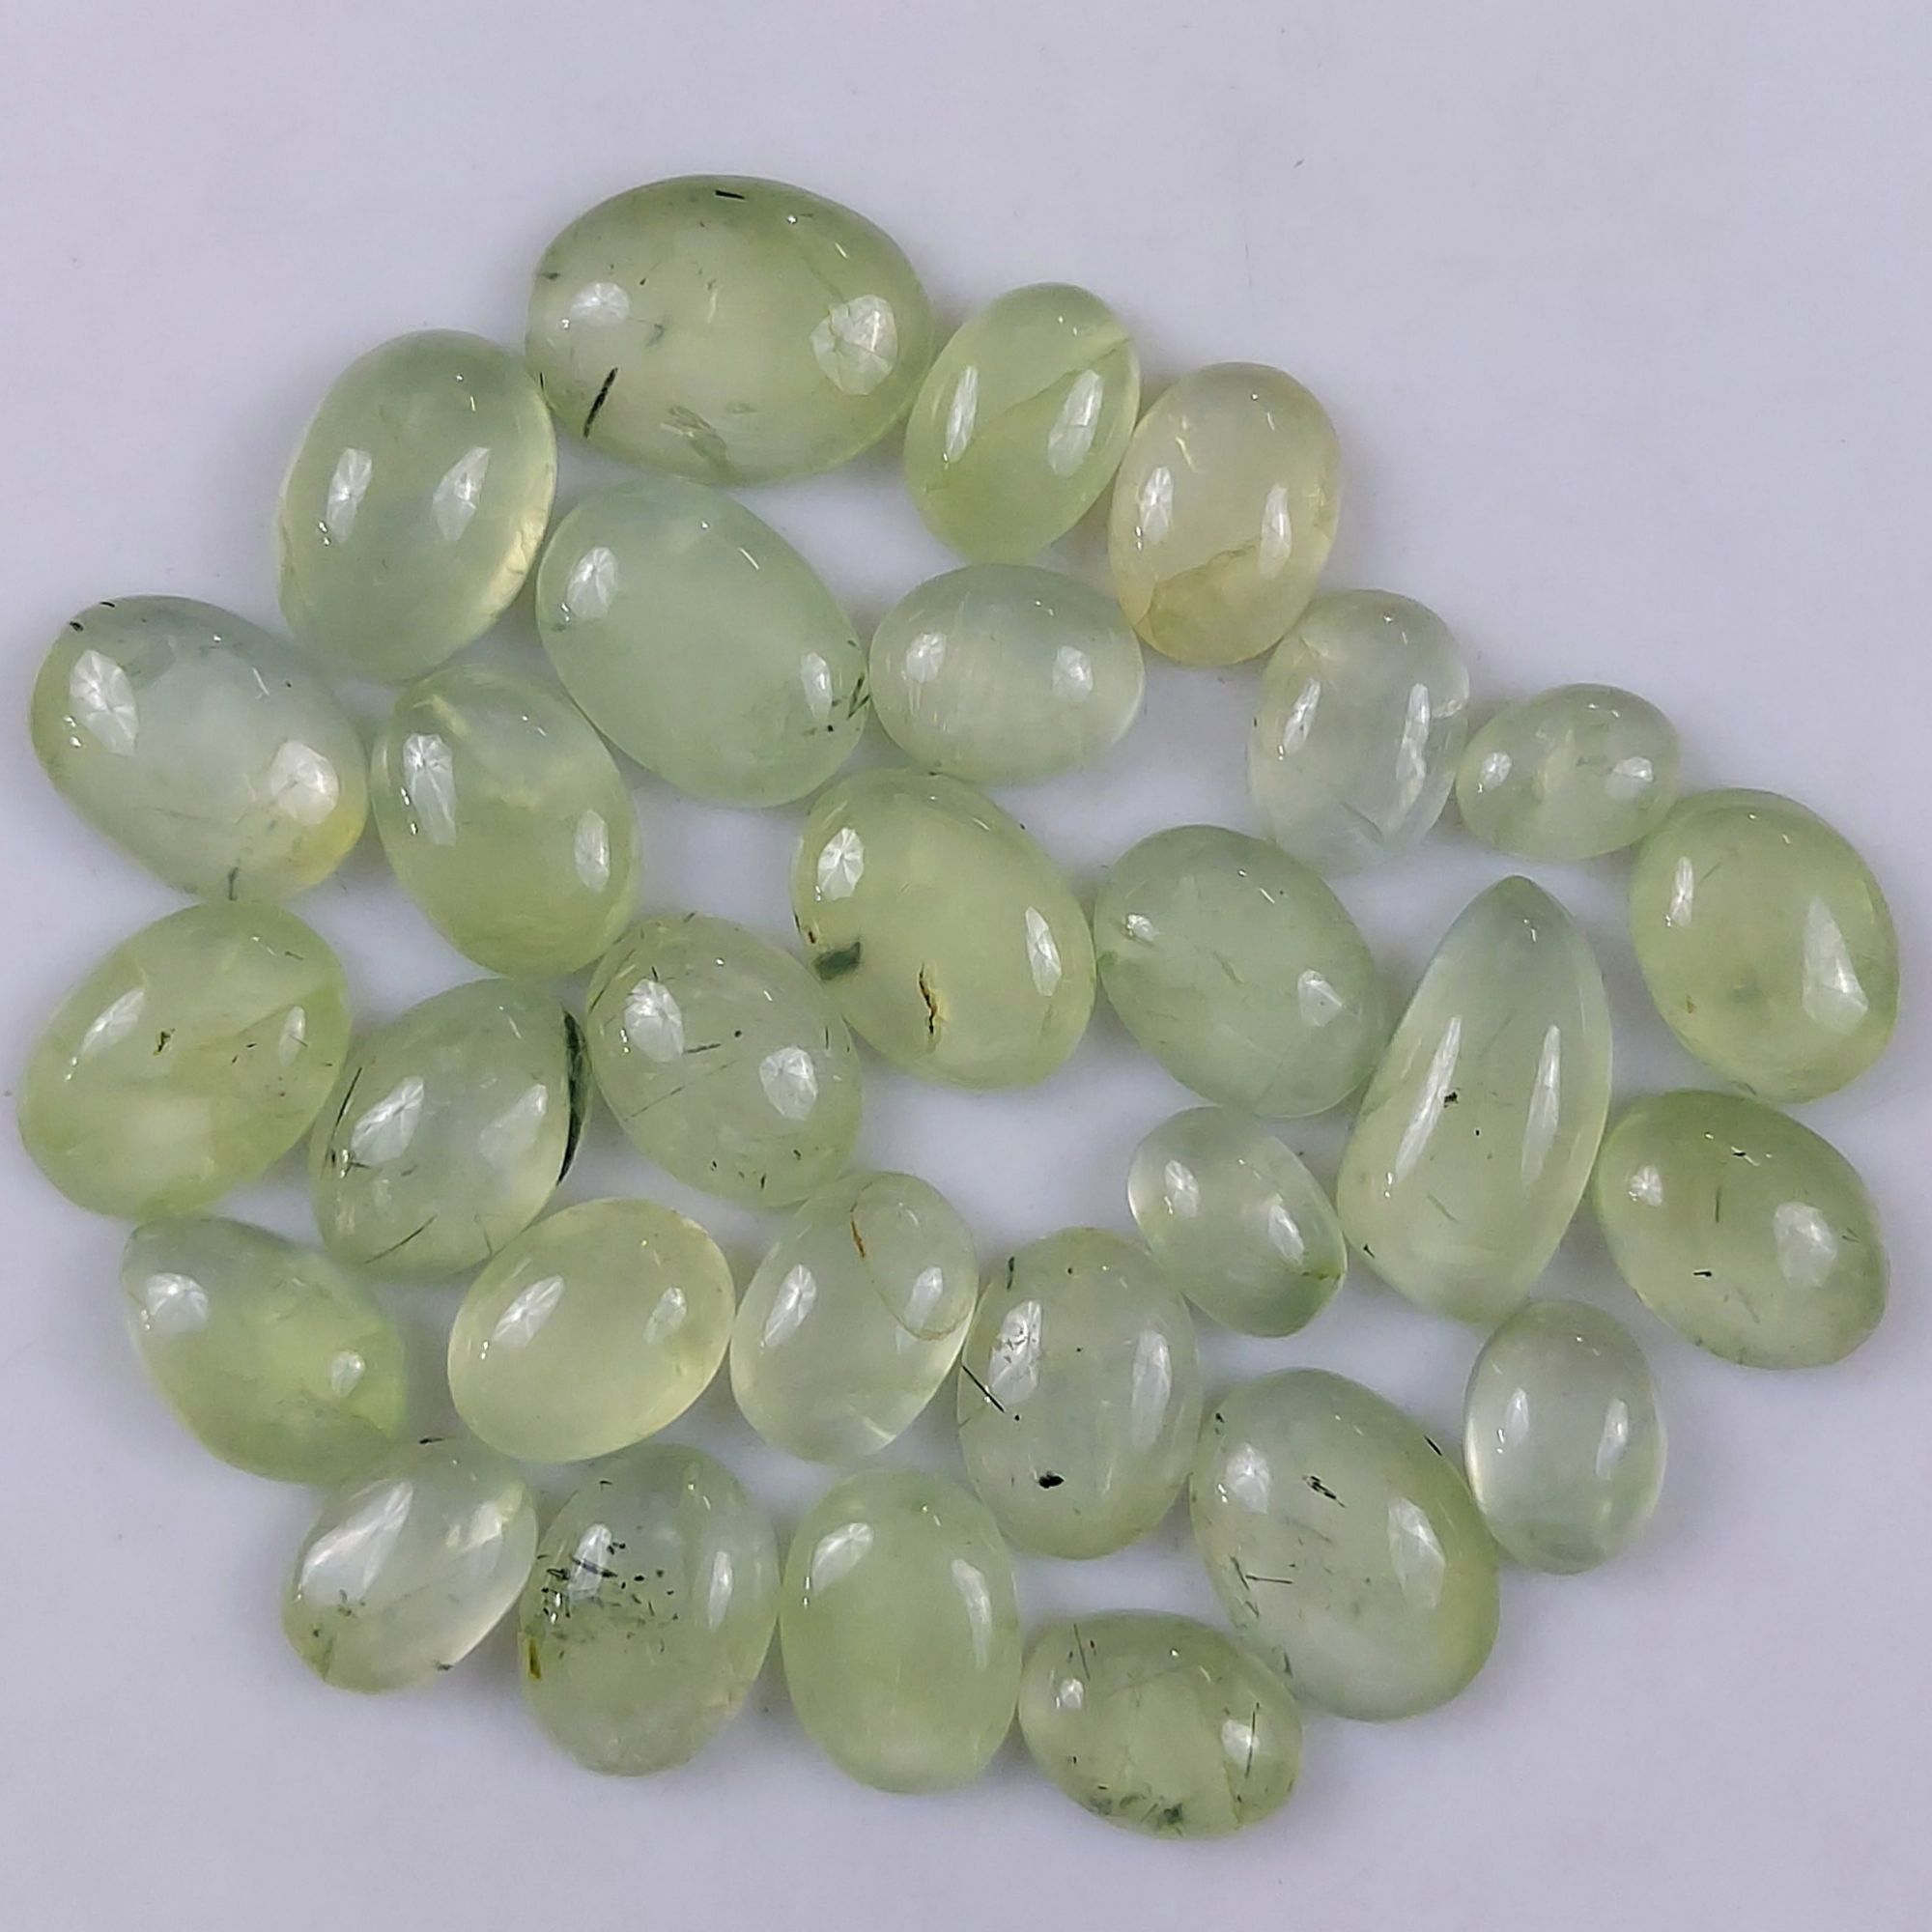 29Pcs 275Cts Natural Green Prehnite Loose Cabochon Gemstone Lot For Jewelry Making  20x8 8x6mm#1243